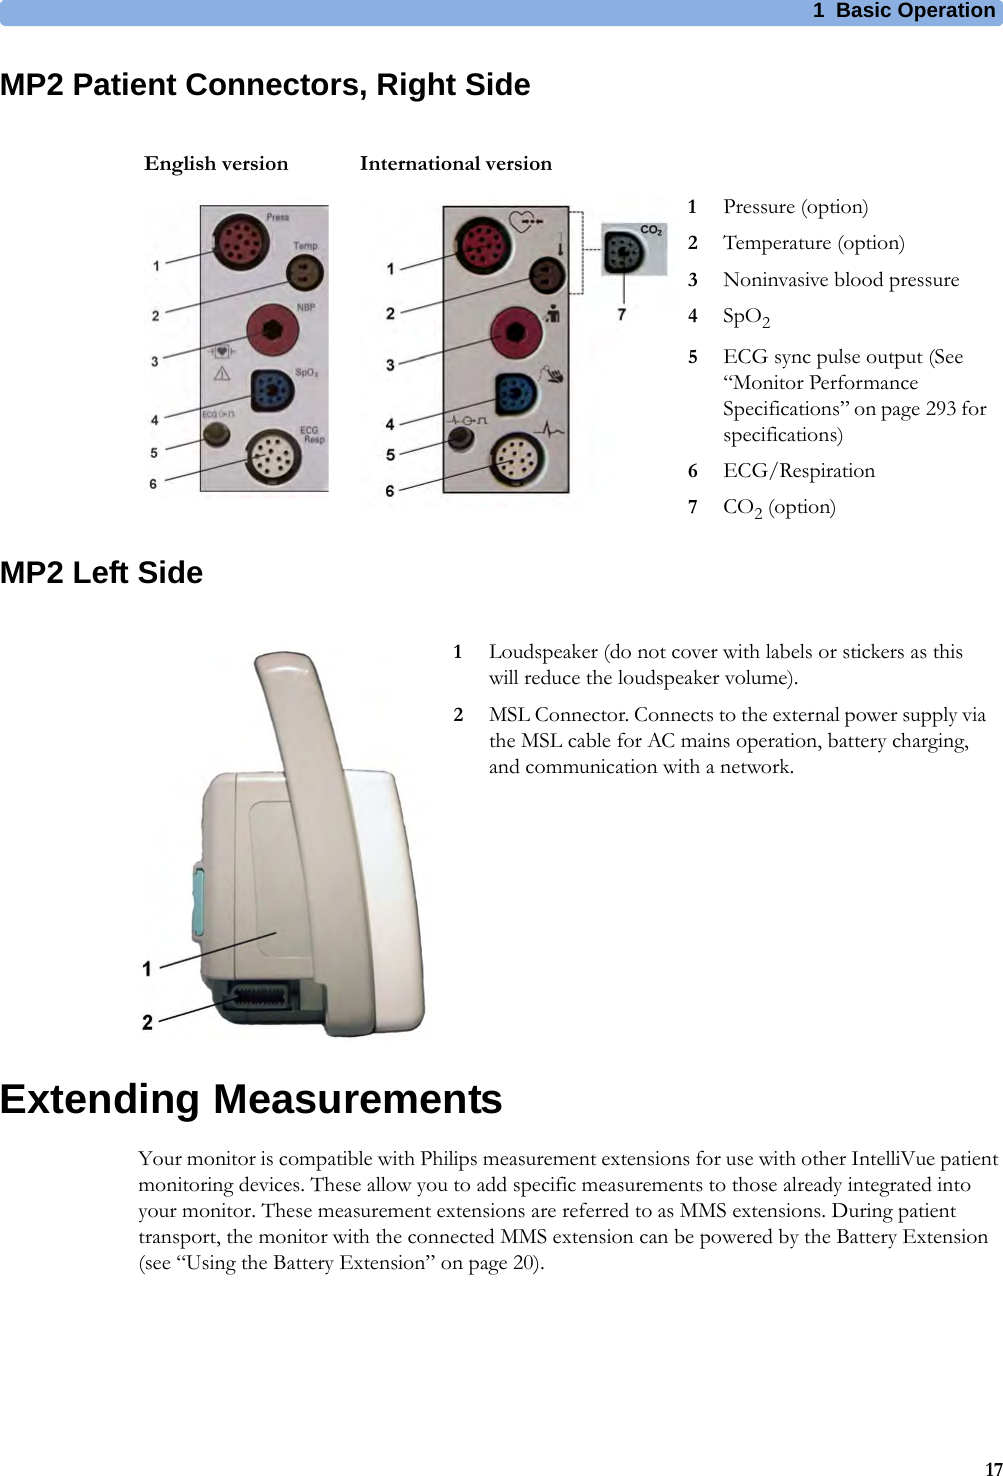 1 Basic Operation17MP2 Patient Connectors, Right SideMP2 Left SideExtending MeasurementsYour monitor is compatible with Philips measurement extensions for use with other IntelliVue patient monitoring devices. These allow you to add specific measurements to those already integrated into your monitor. These measurement extensions are referred to as MMS extensions. During patient transport, the monitor with the connected MMS extension can be powered by the Battery Extension (see “Using the Battery Extension” on page 20).English version International version1Pressure (option)2Temperature (option)3Noninvasive blood pressure4SpO25ECG sync pulse output (See “Monitor Performance Specifications” on page 293 for specifications)6ECG/Respiration7CO2 (option)1Loudspeaker (do not cover with labels or stickers as this will reduce the loudspeaker volume).2MSL Connector. Connects to the external power supply via the MSL cable for AC mains operation, battery charging, and communication with a network.